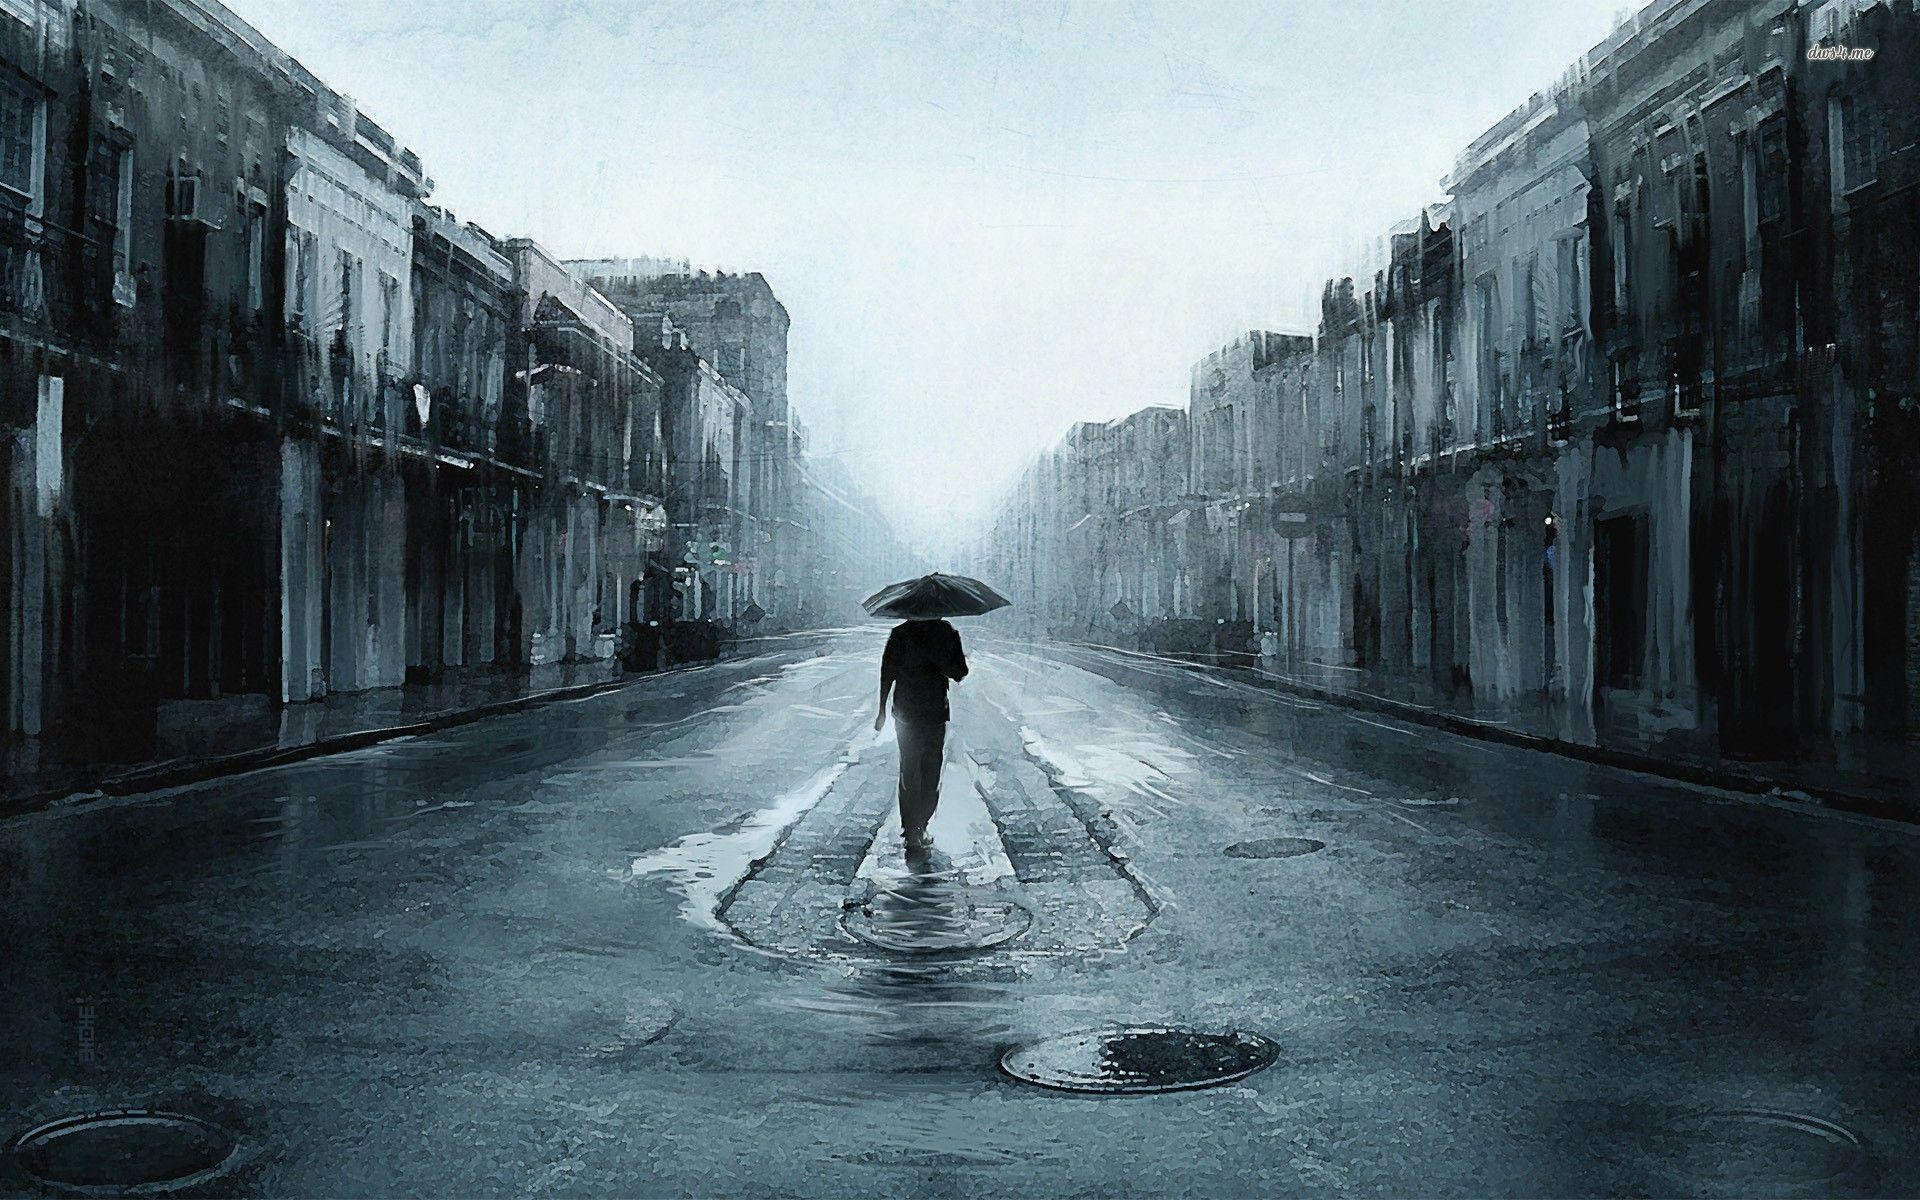 1920x1200 Walking in the rainy street wallpaper - Artistic wallpapers - #